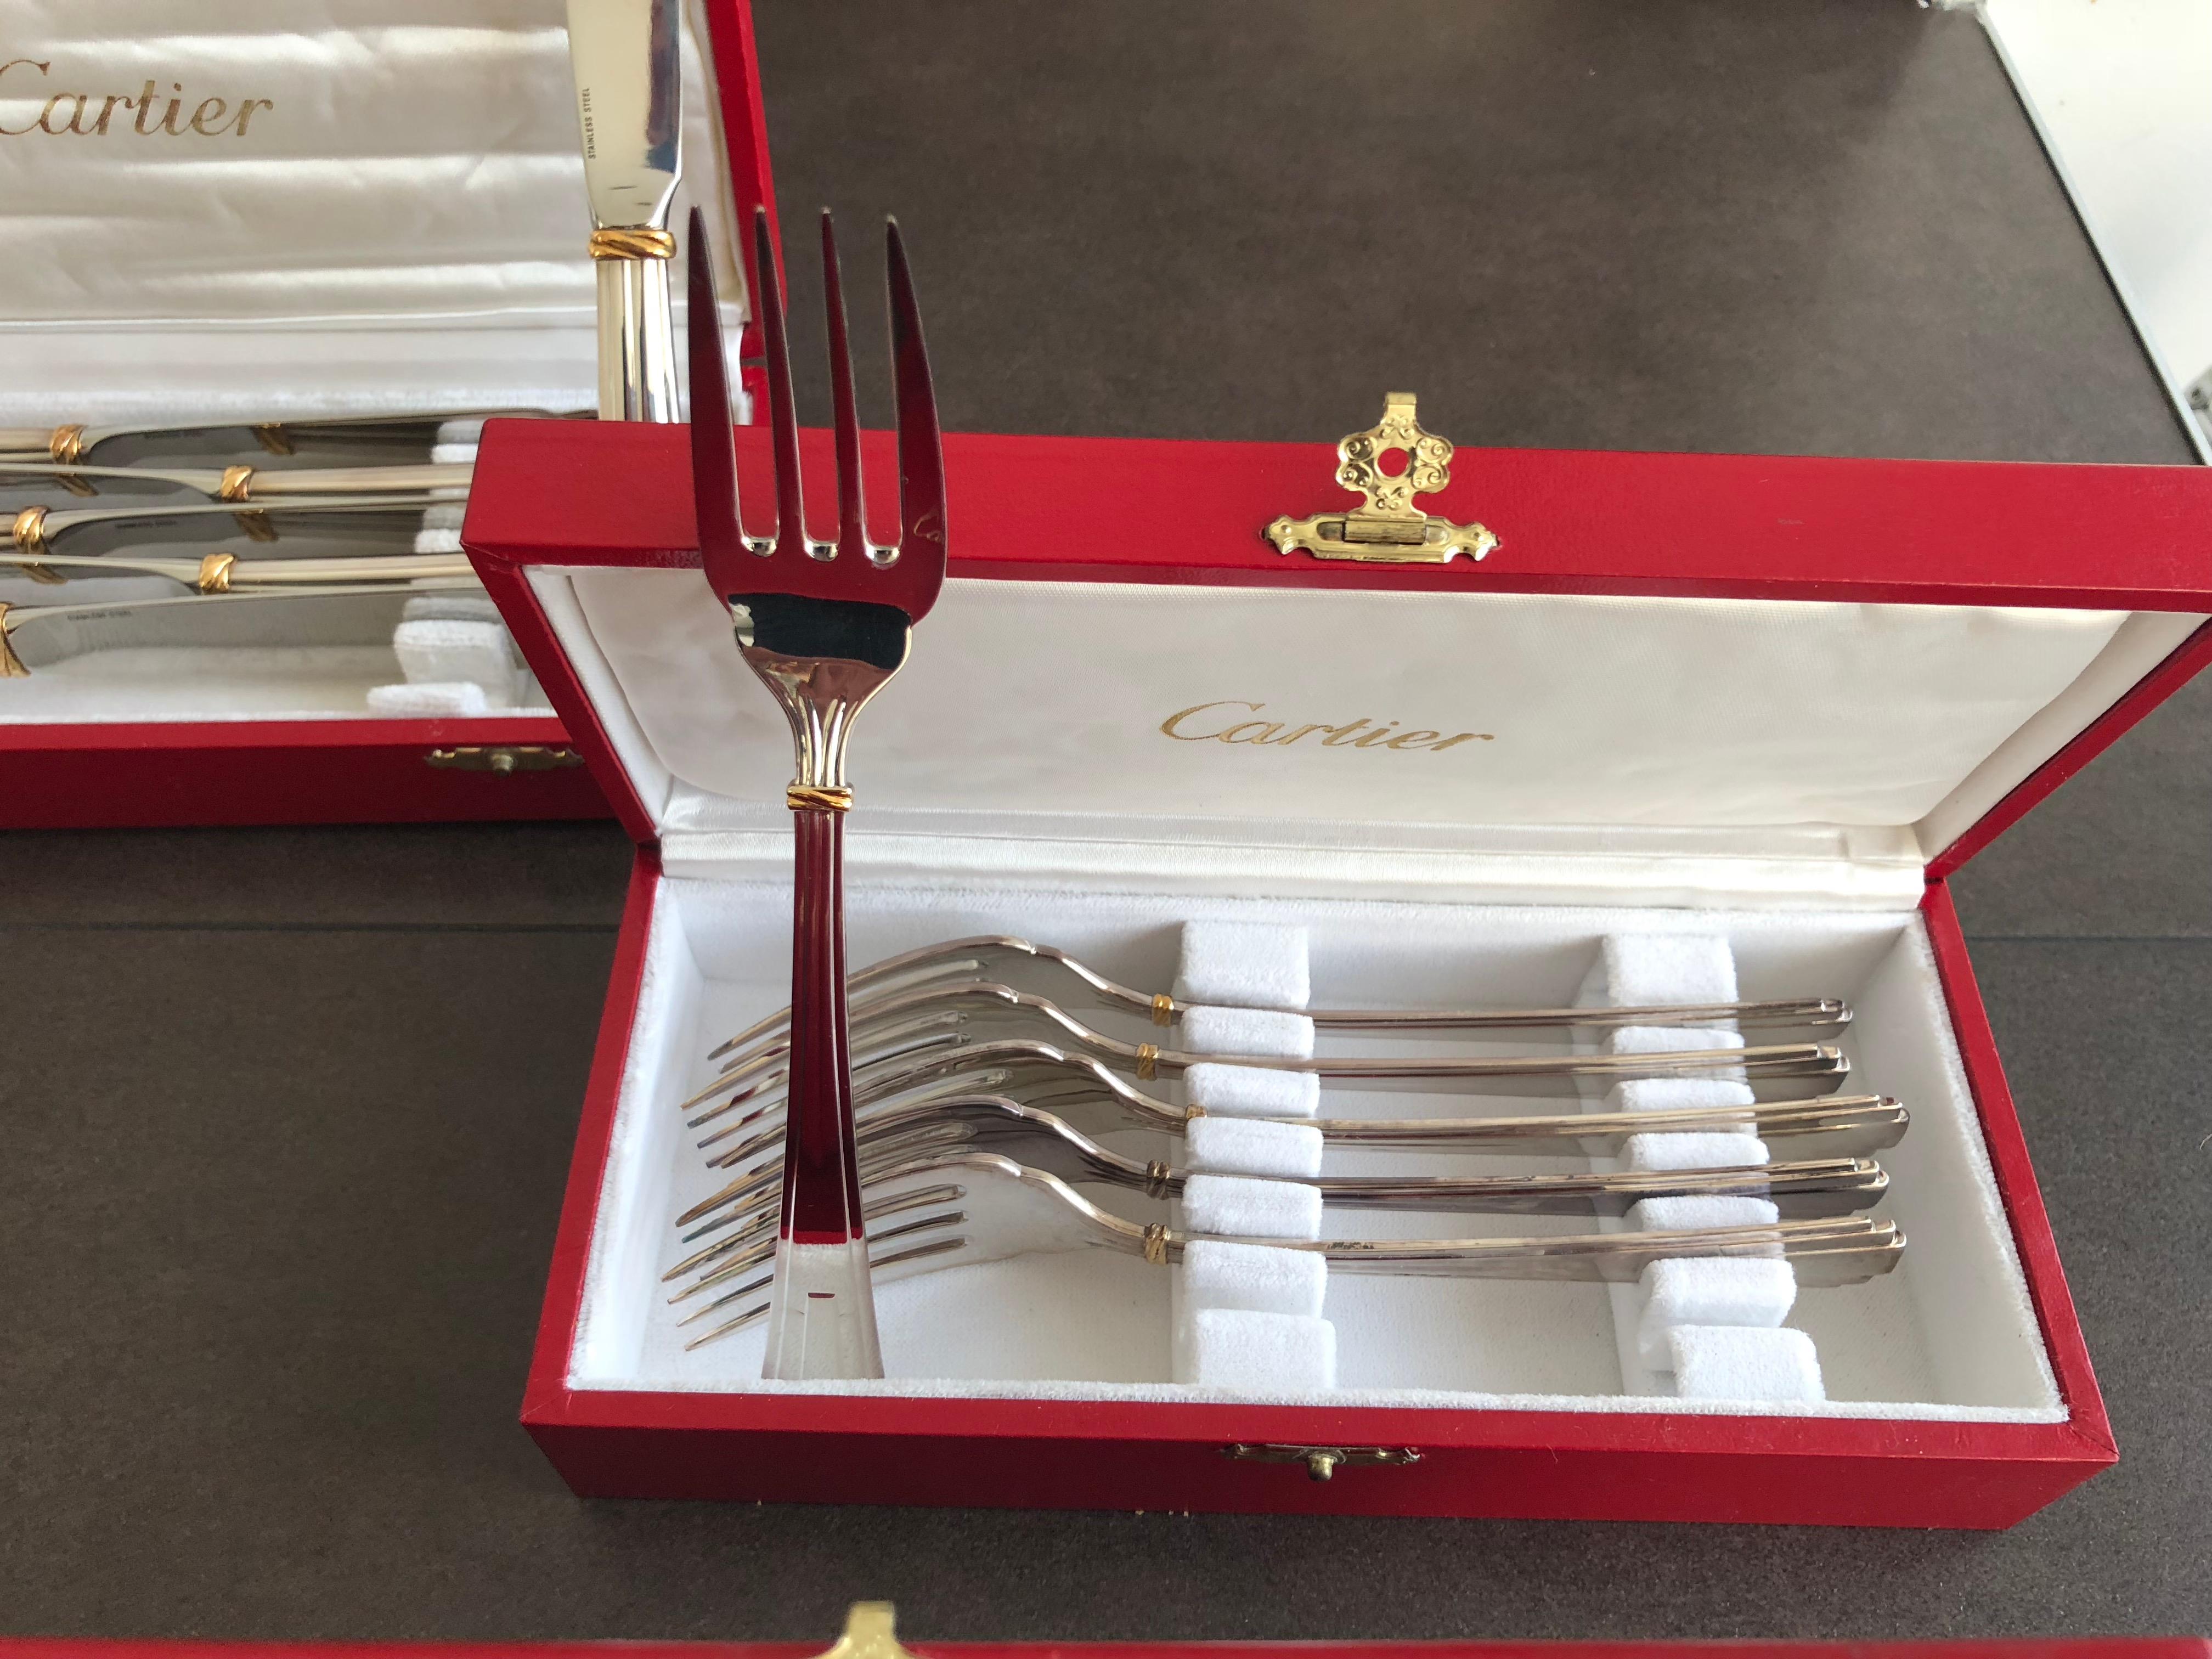 New Cartier Boxed Silverware Set Signed, Fork Knife Spoon in Silver Gold Trinity 1